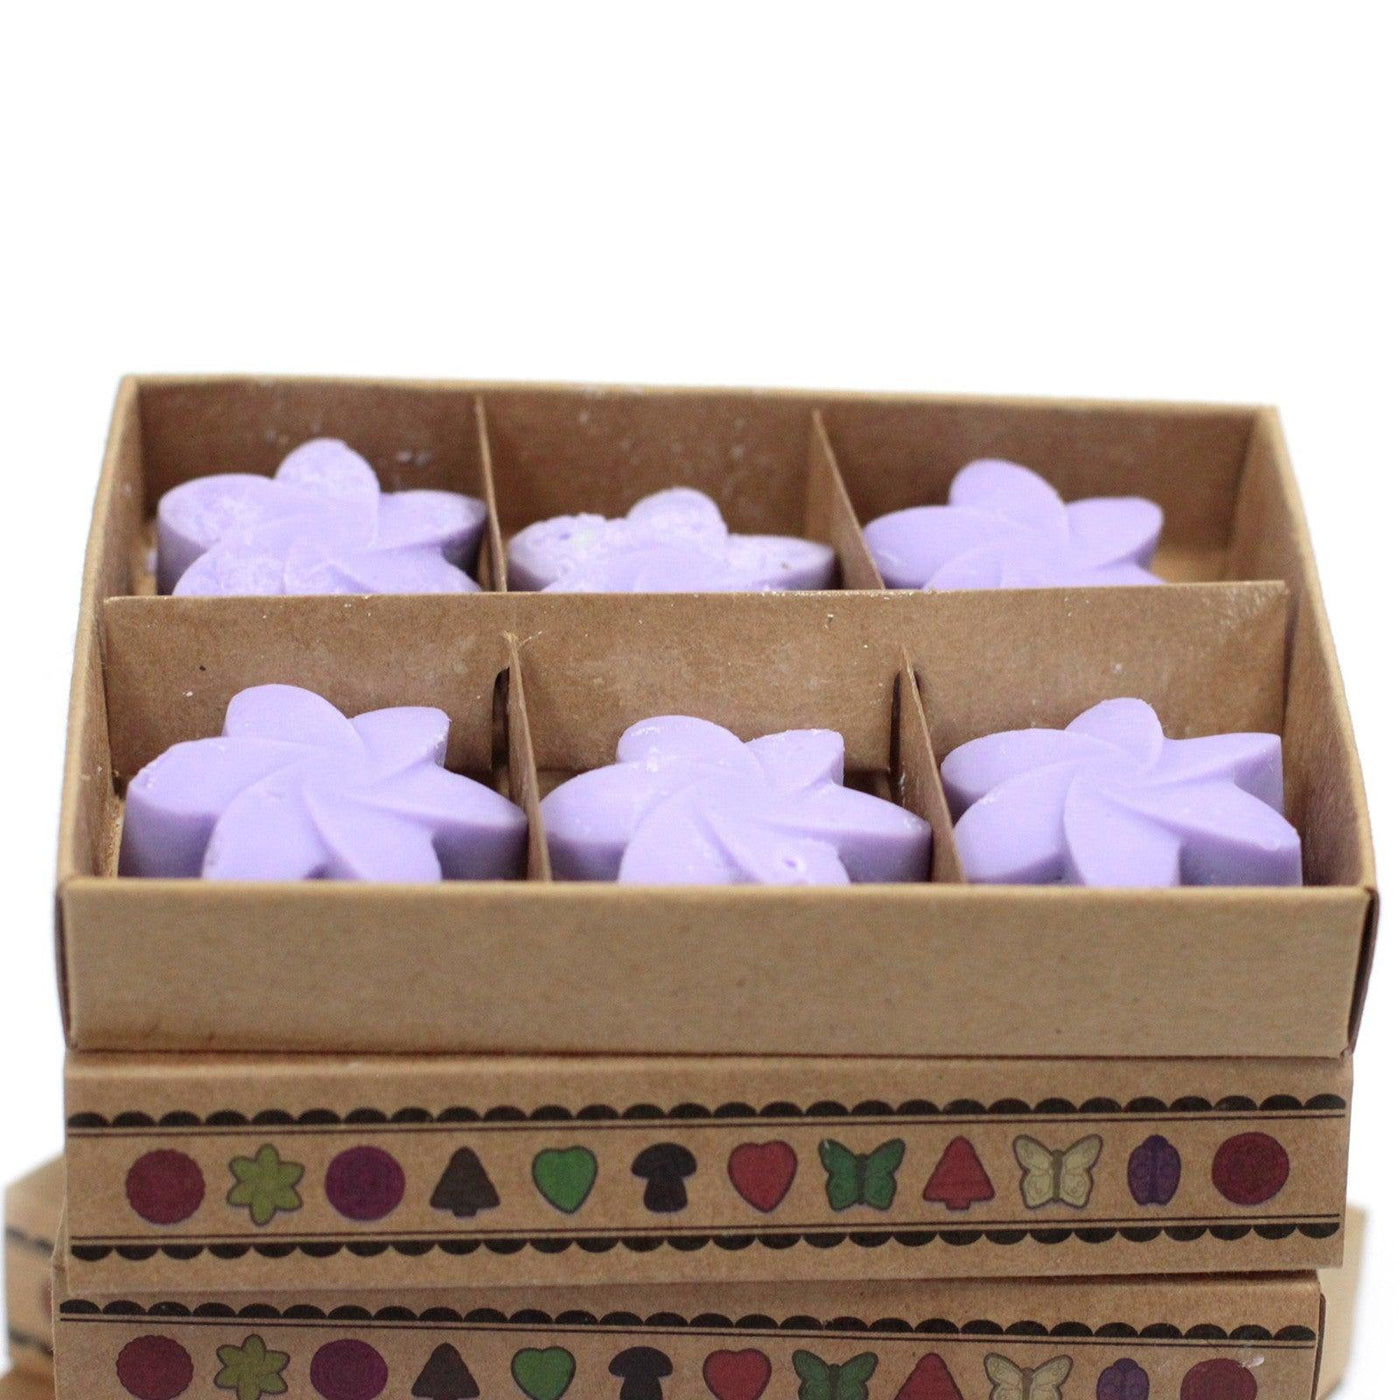 Box of 6 Star Shaped Lilac Wax Melts – Lavender Fields.